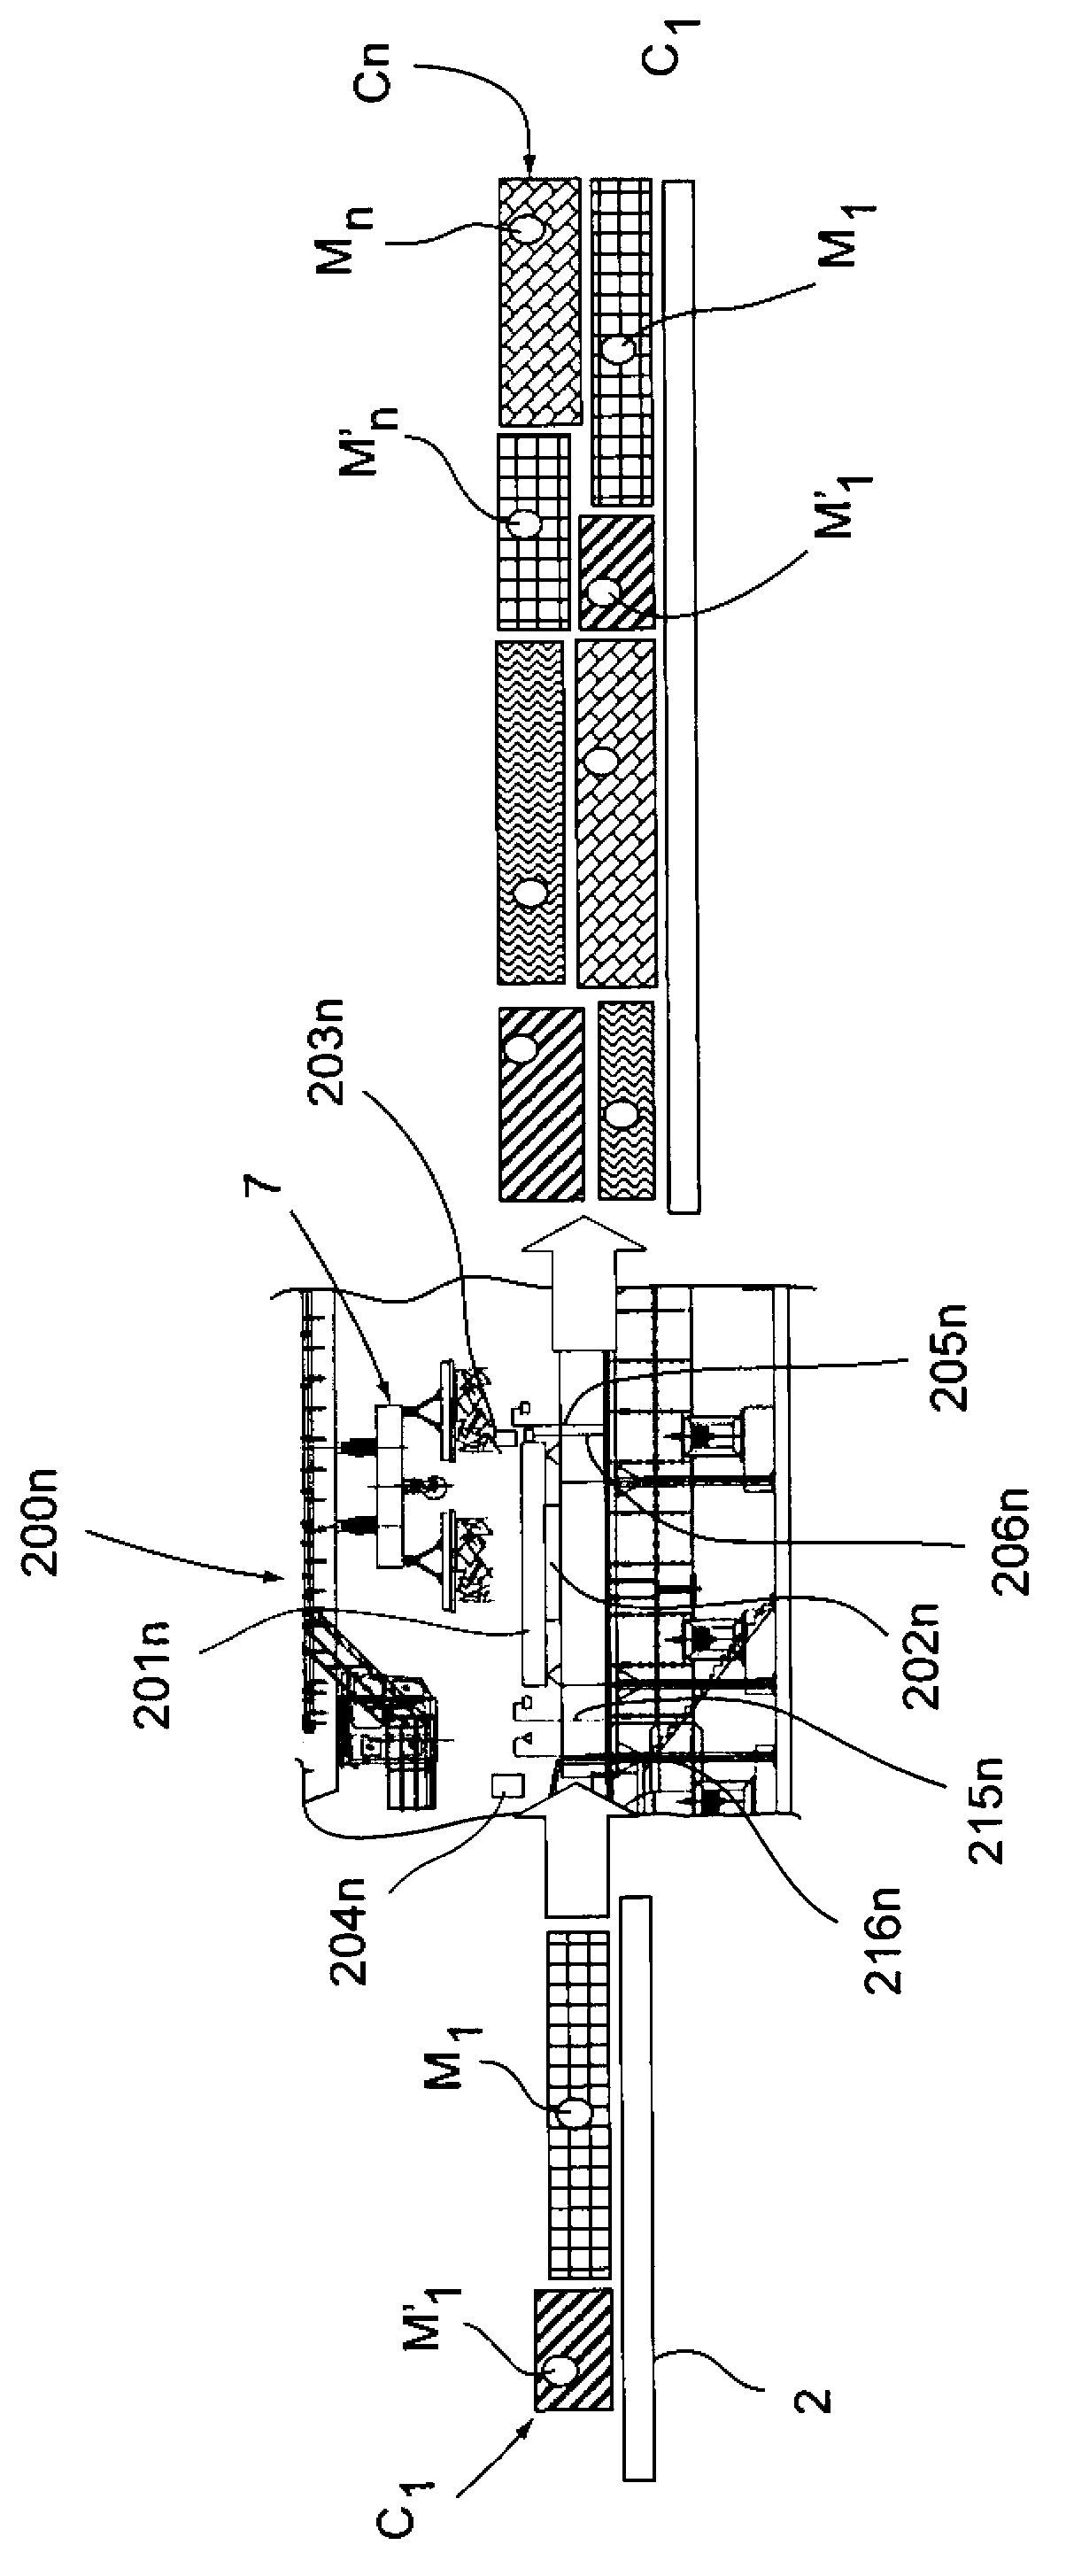 Method and control and tracking system of the charge of material transported by a continuous supply conveyor of a metallurgical furnace, particularly an electric furnace for the production of steel